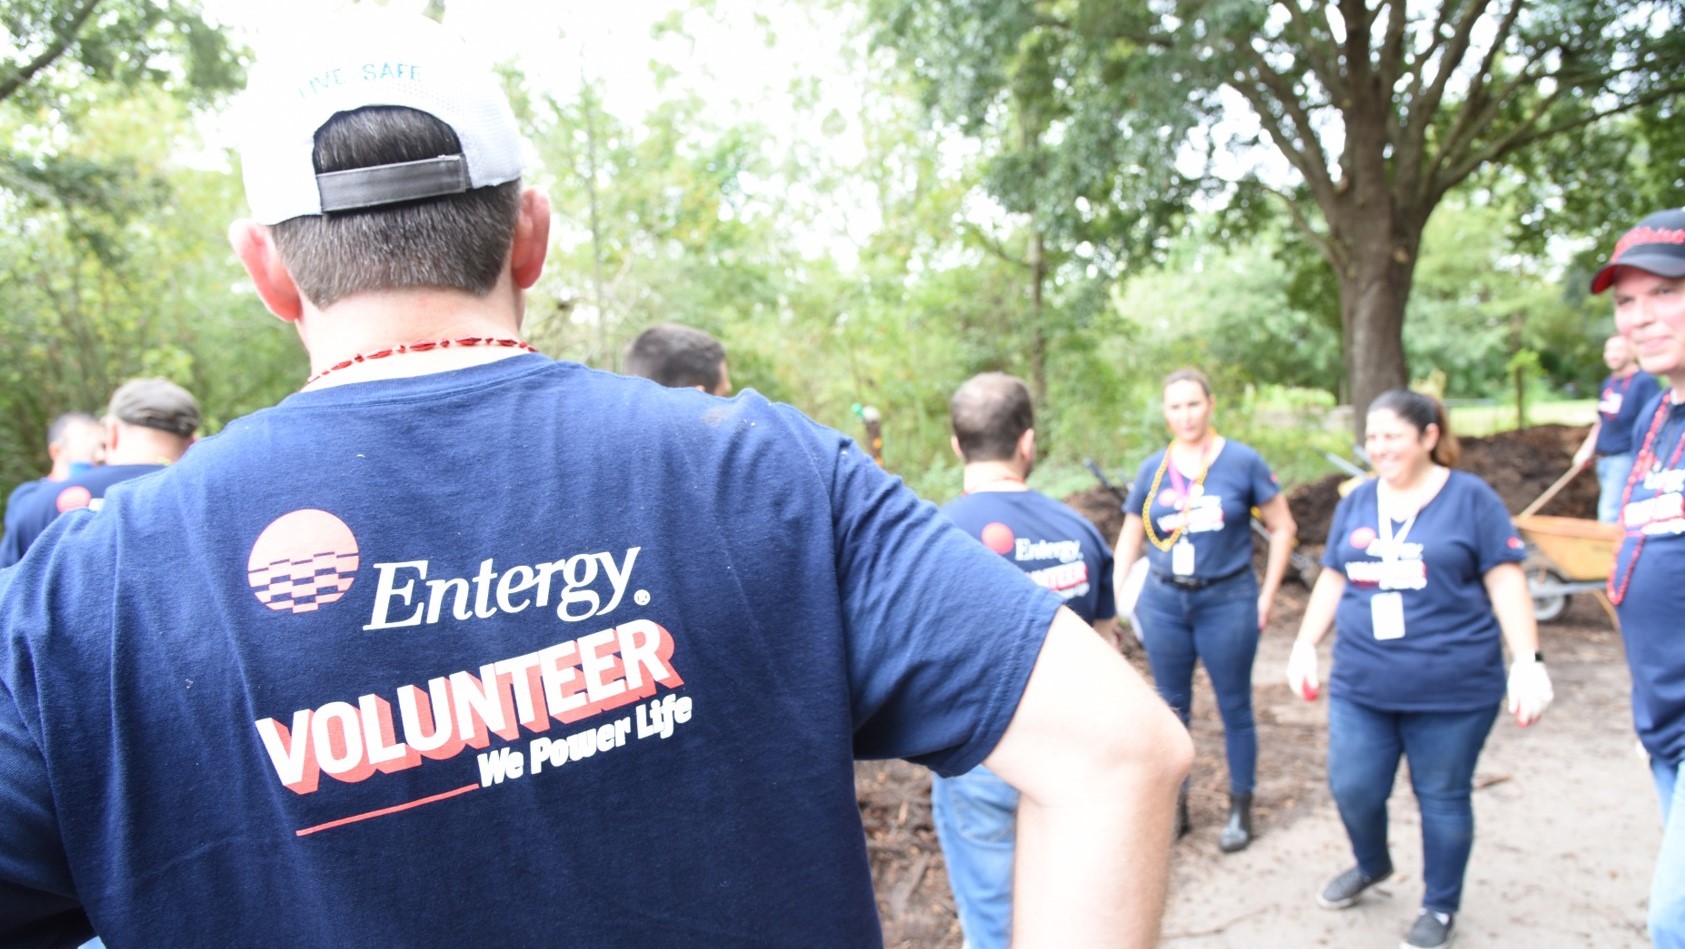 Entergy has been named to The Civic 50 for fifth consecutive year.